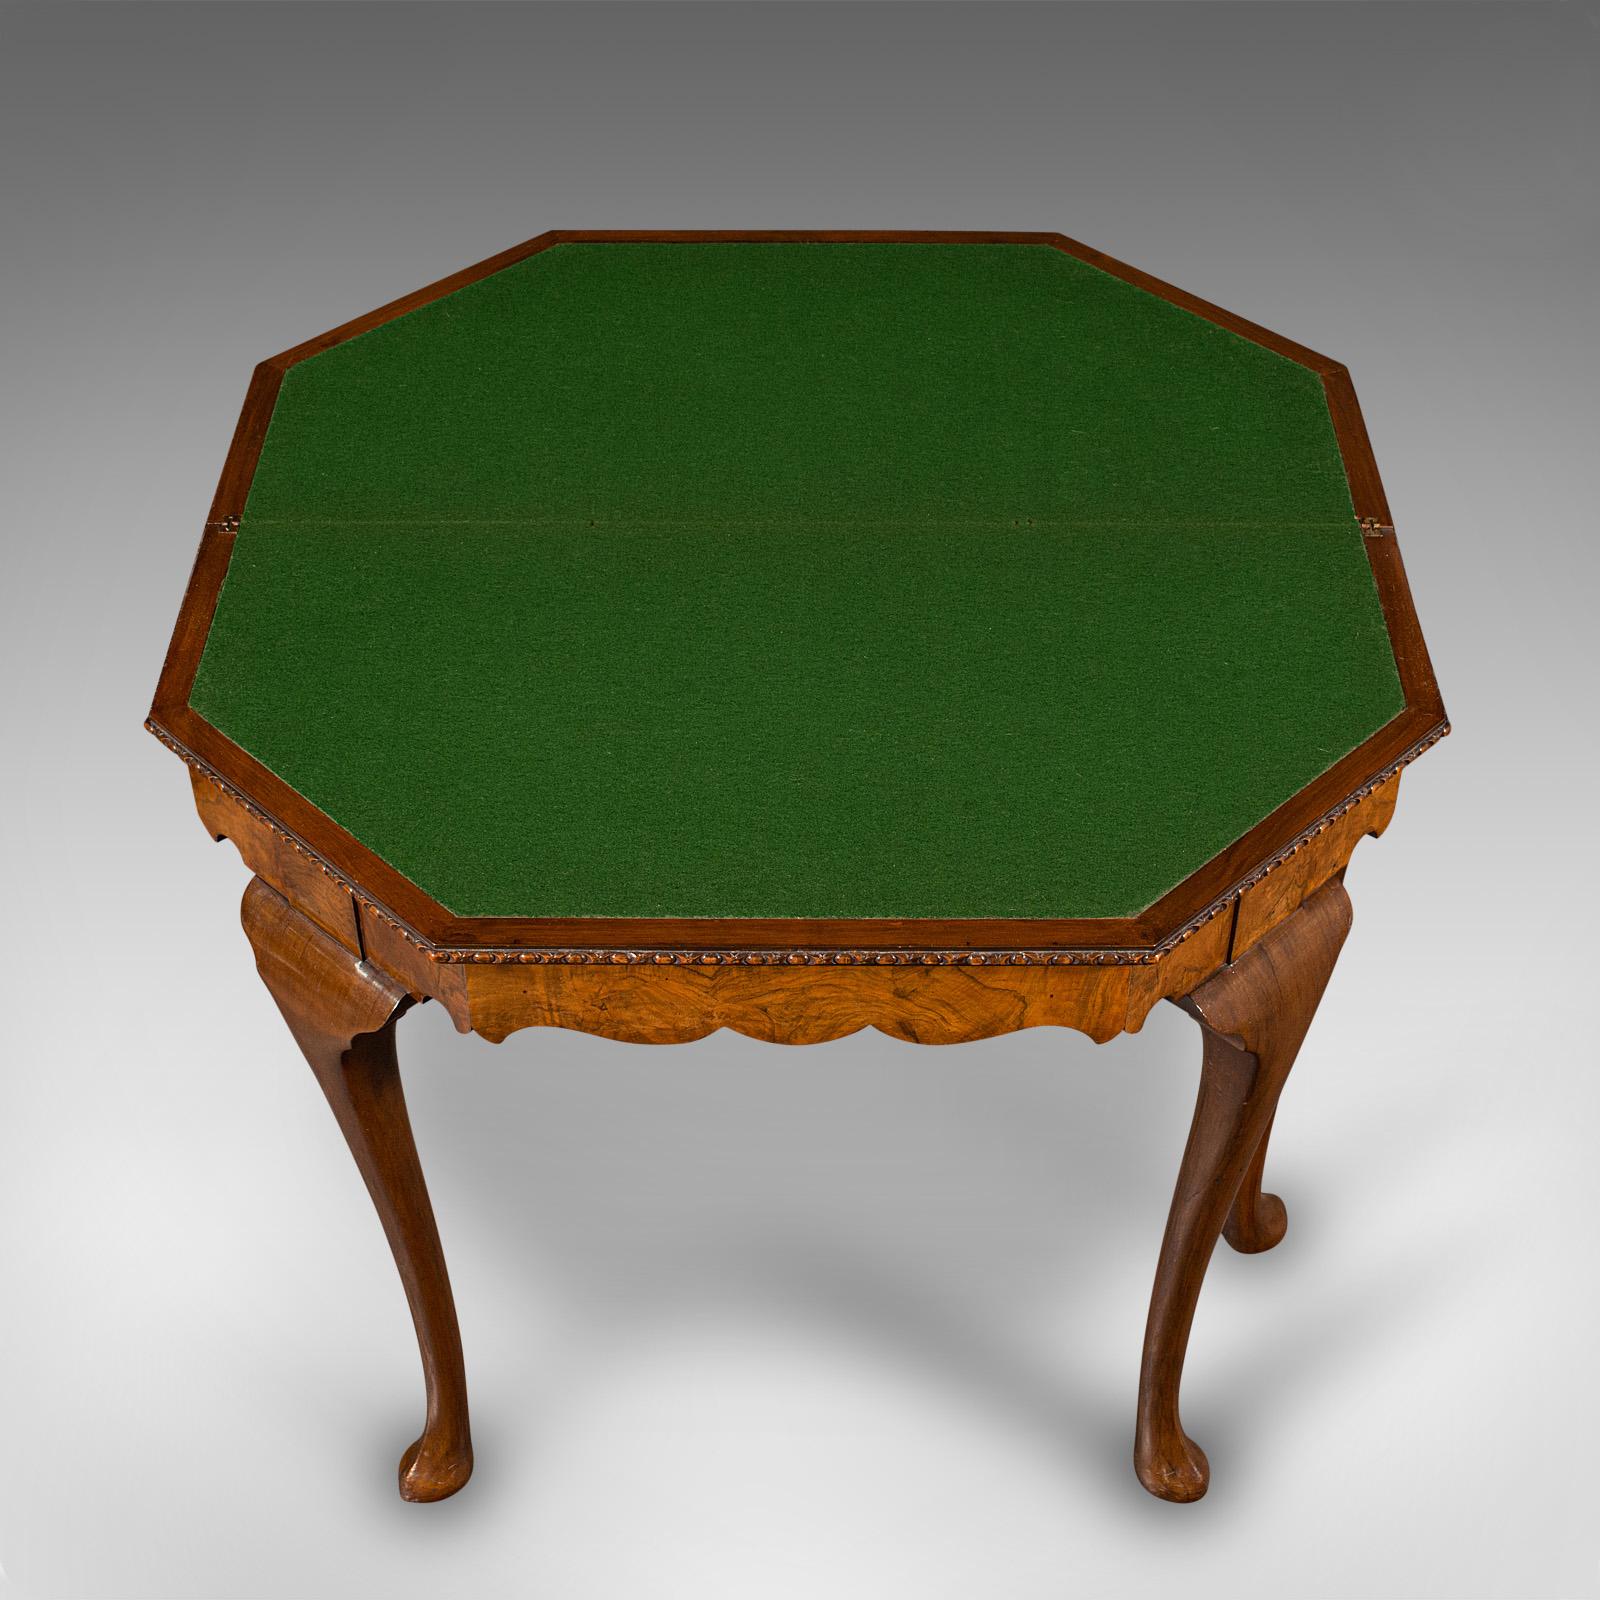 Antique Fold Over Card Table, English Walnut, Games, Georgian Revival, Edwardian For Sale 1